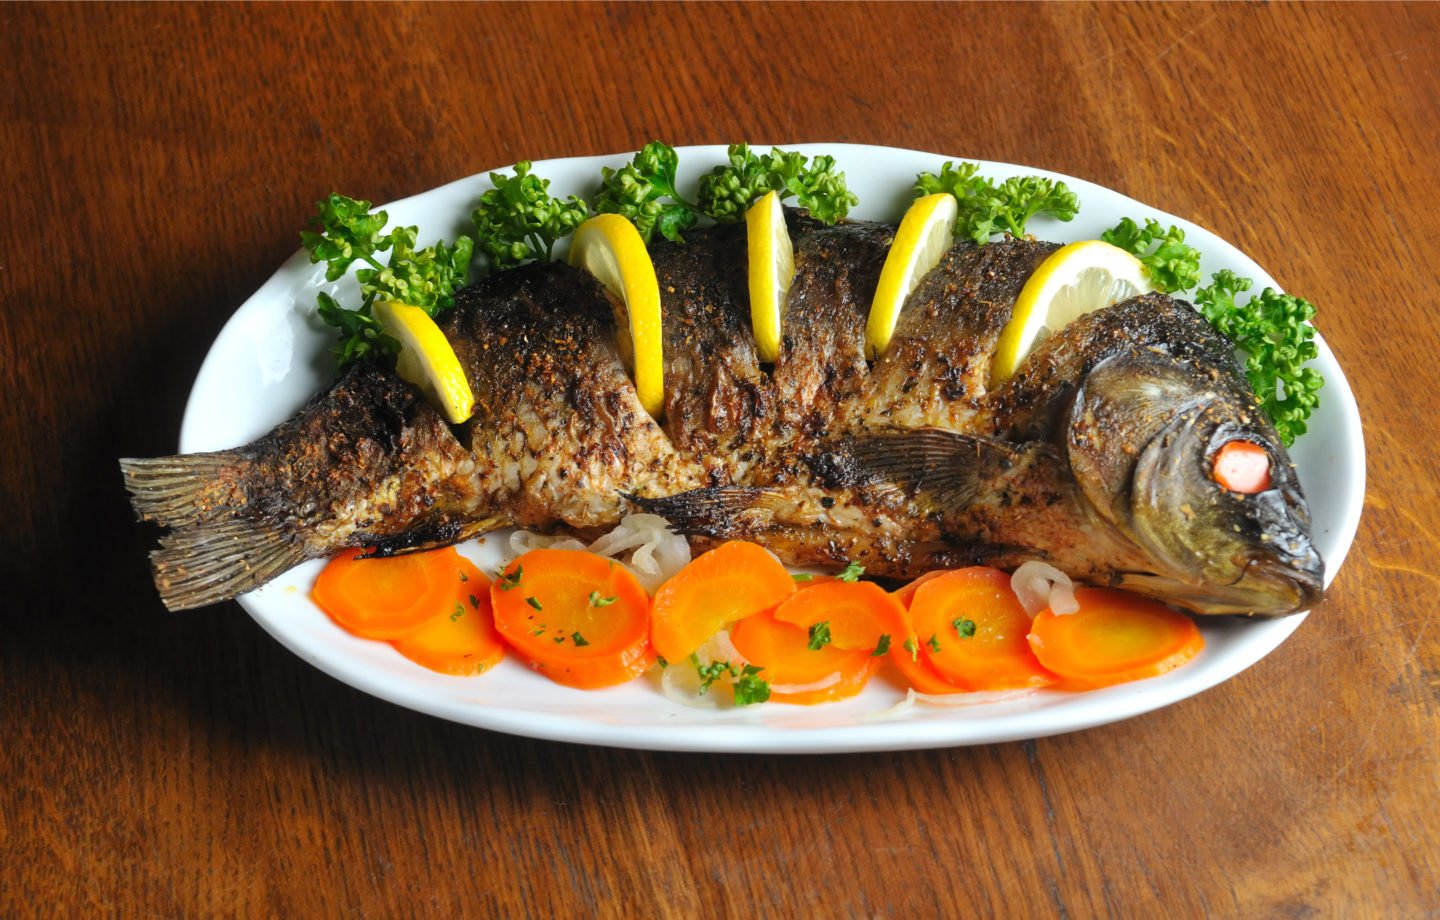 Baked Carp On Plate With Vegetables